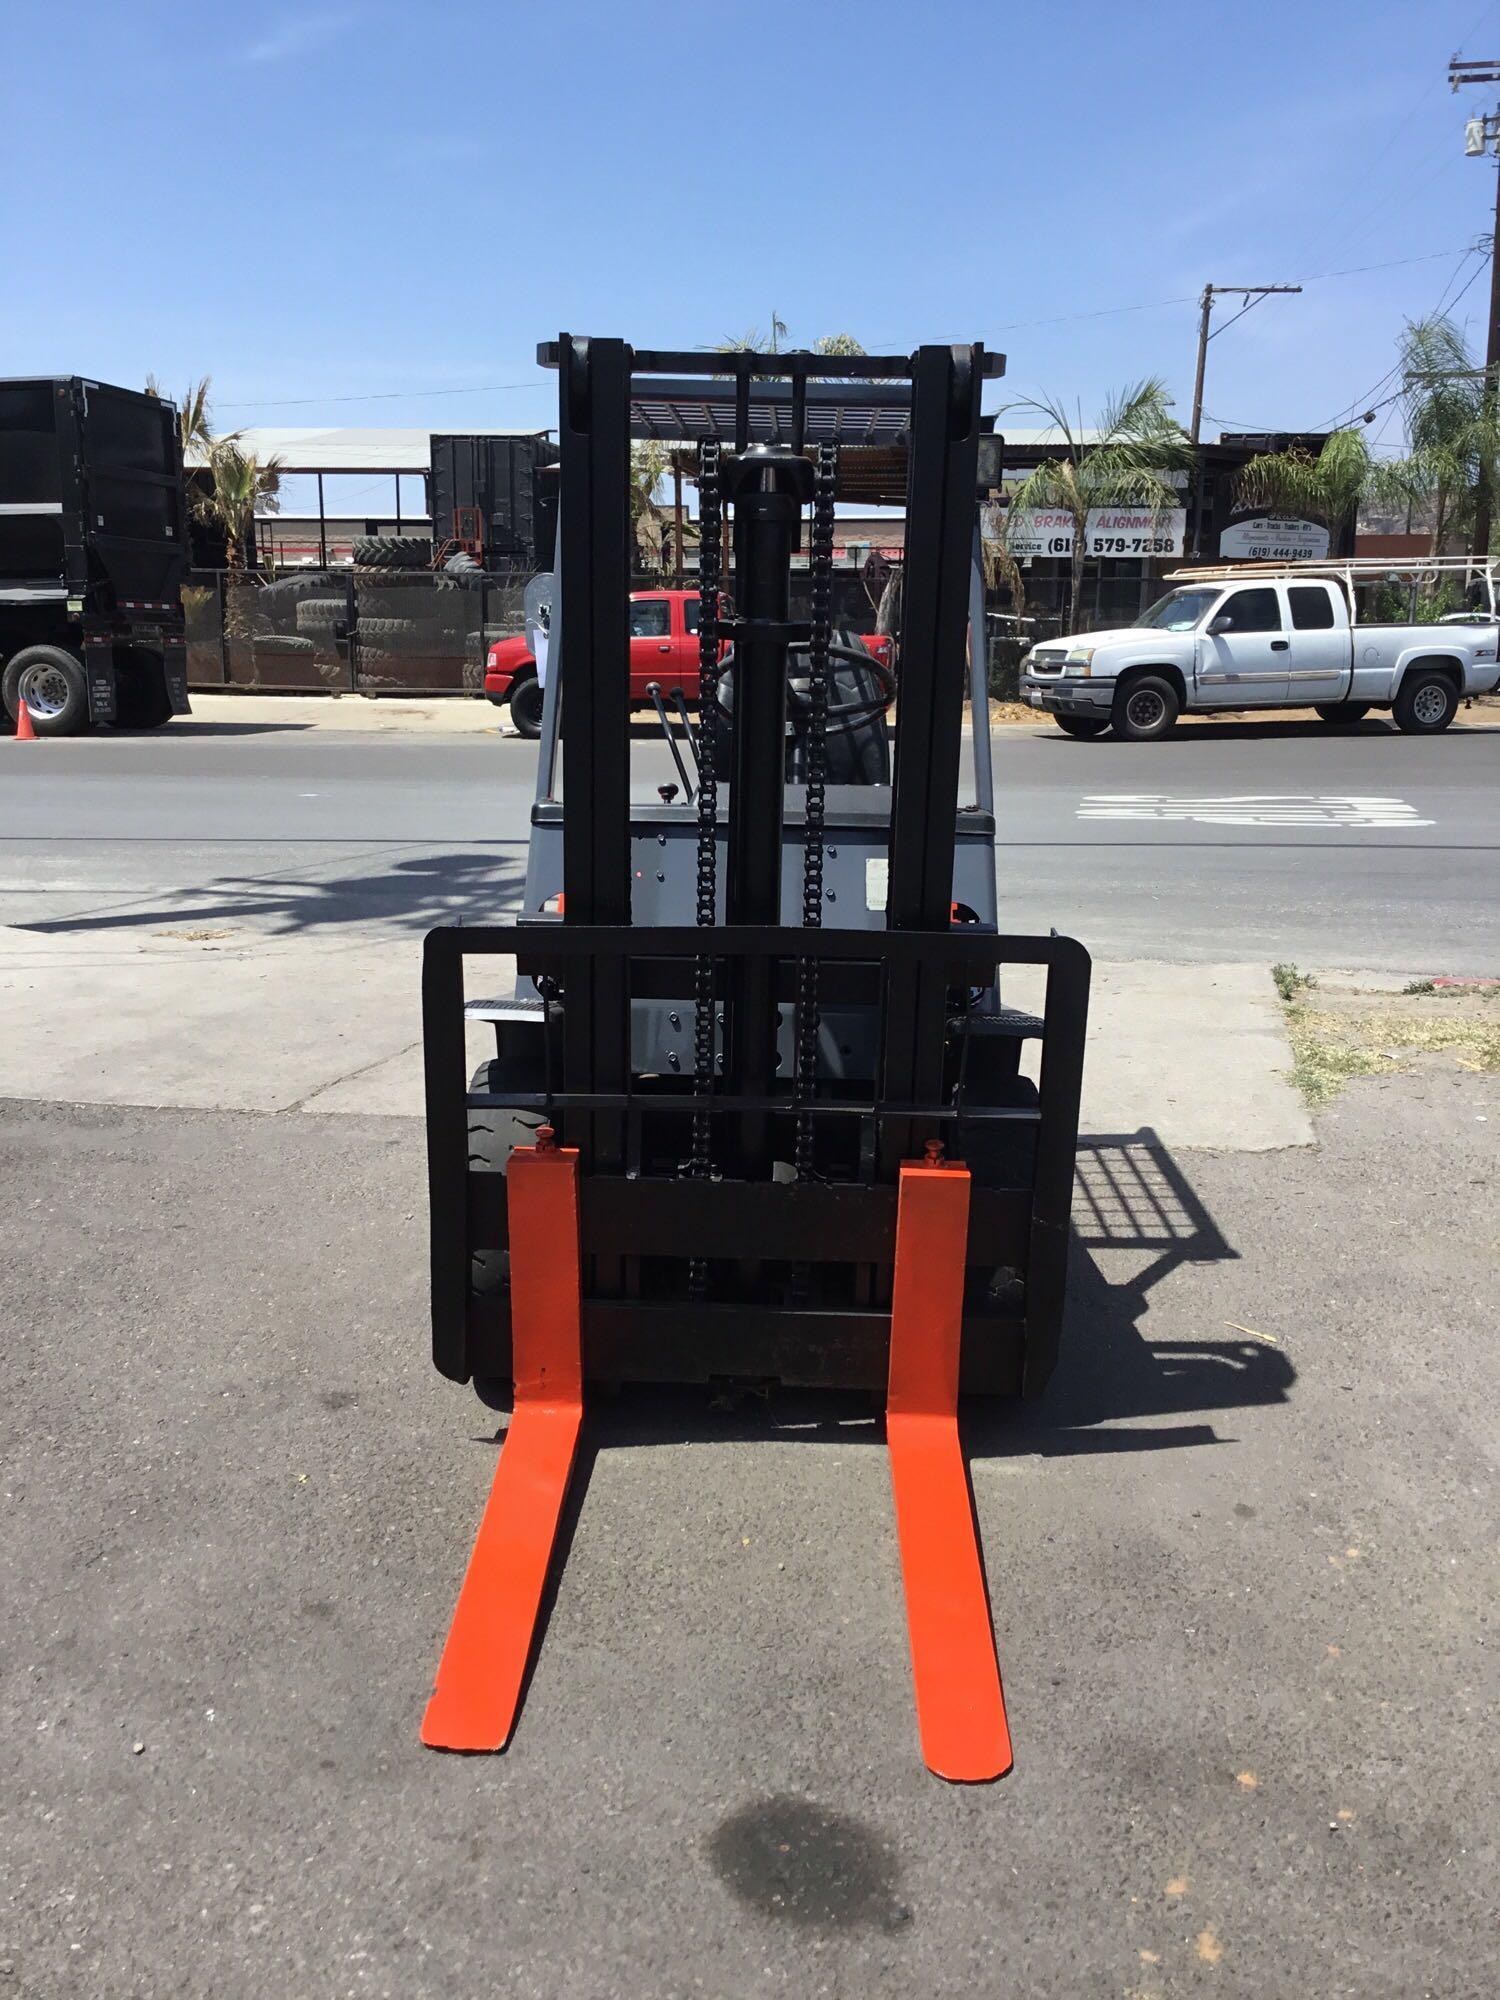 Toyota 4-Cylinder Gasoline Powered Forklift with pneumatic tires